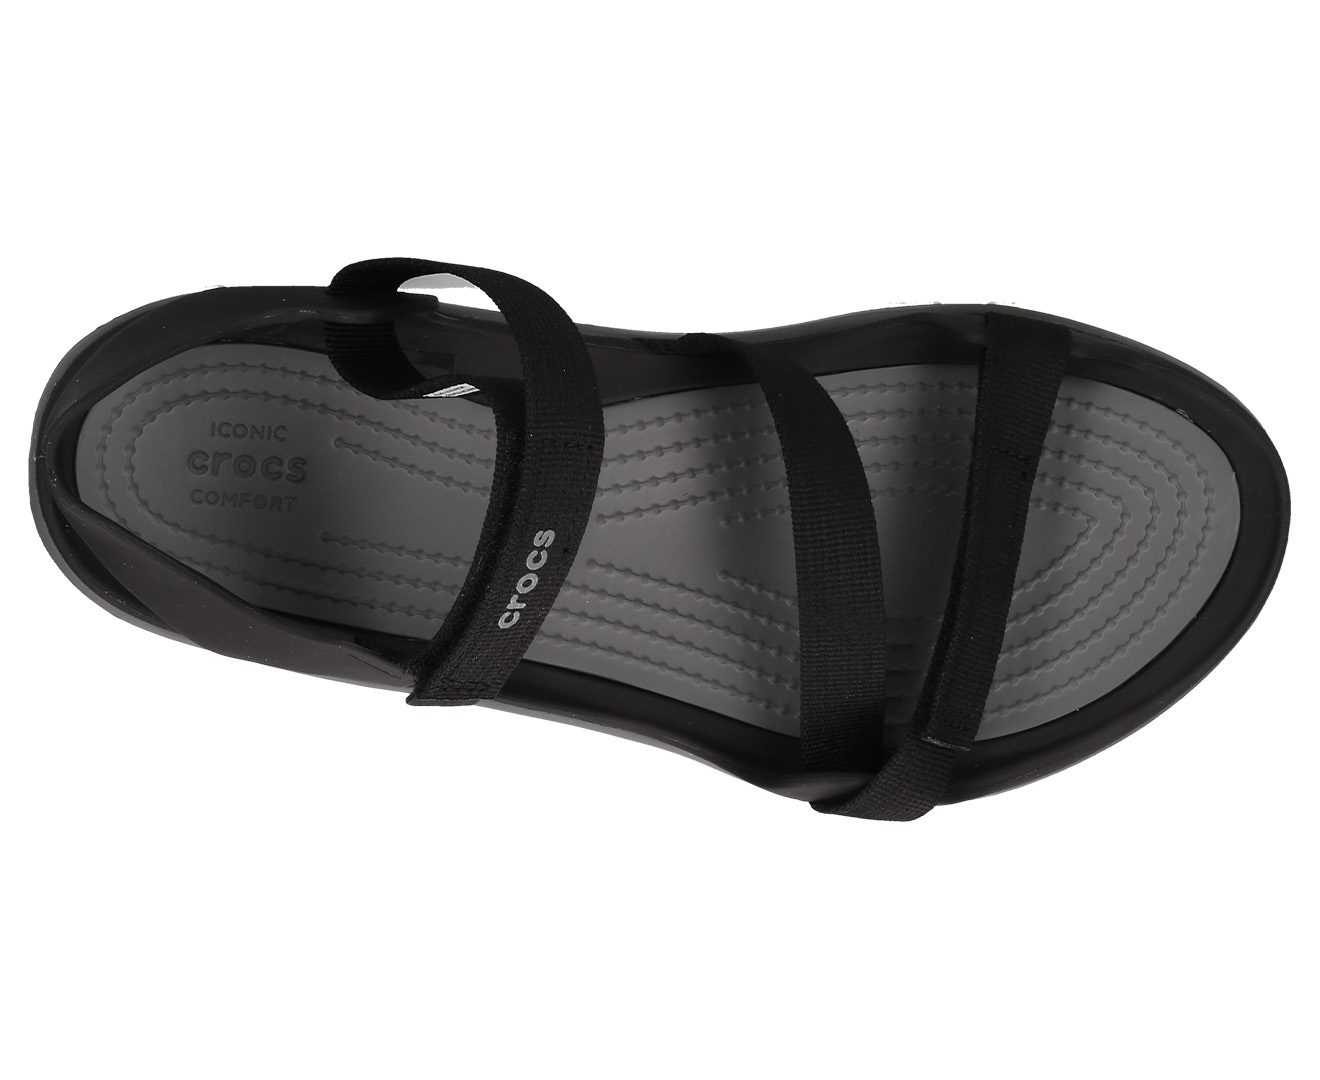 Crocs Swiftwater Expedition Sandal Review